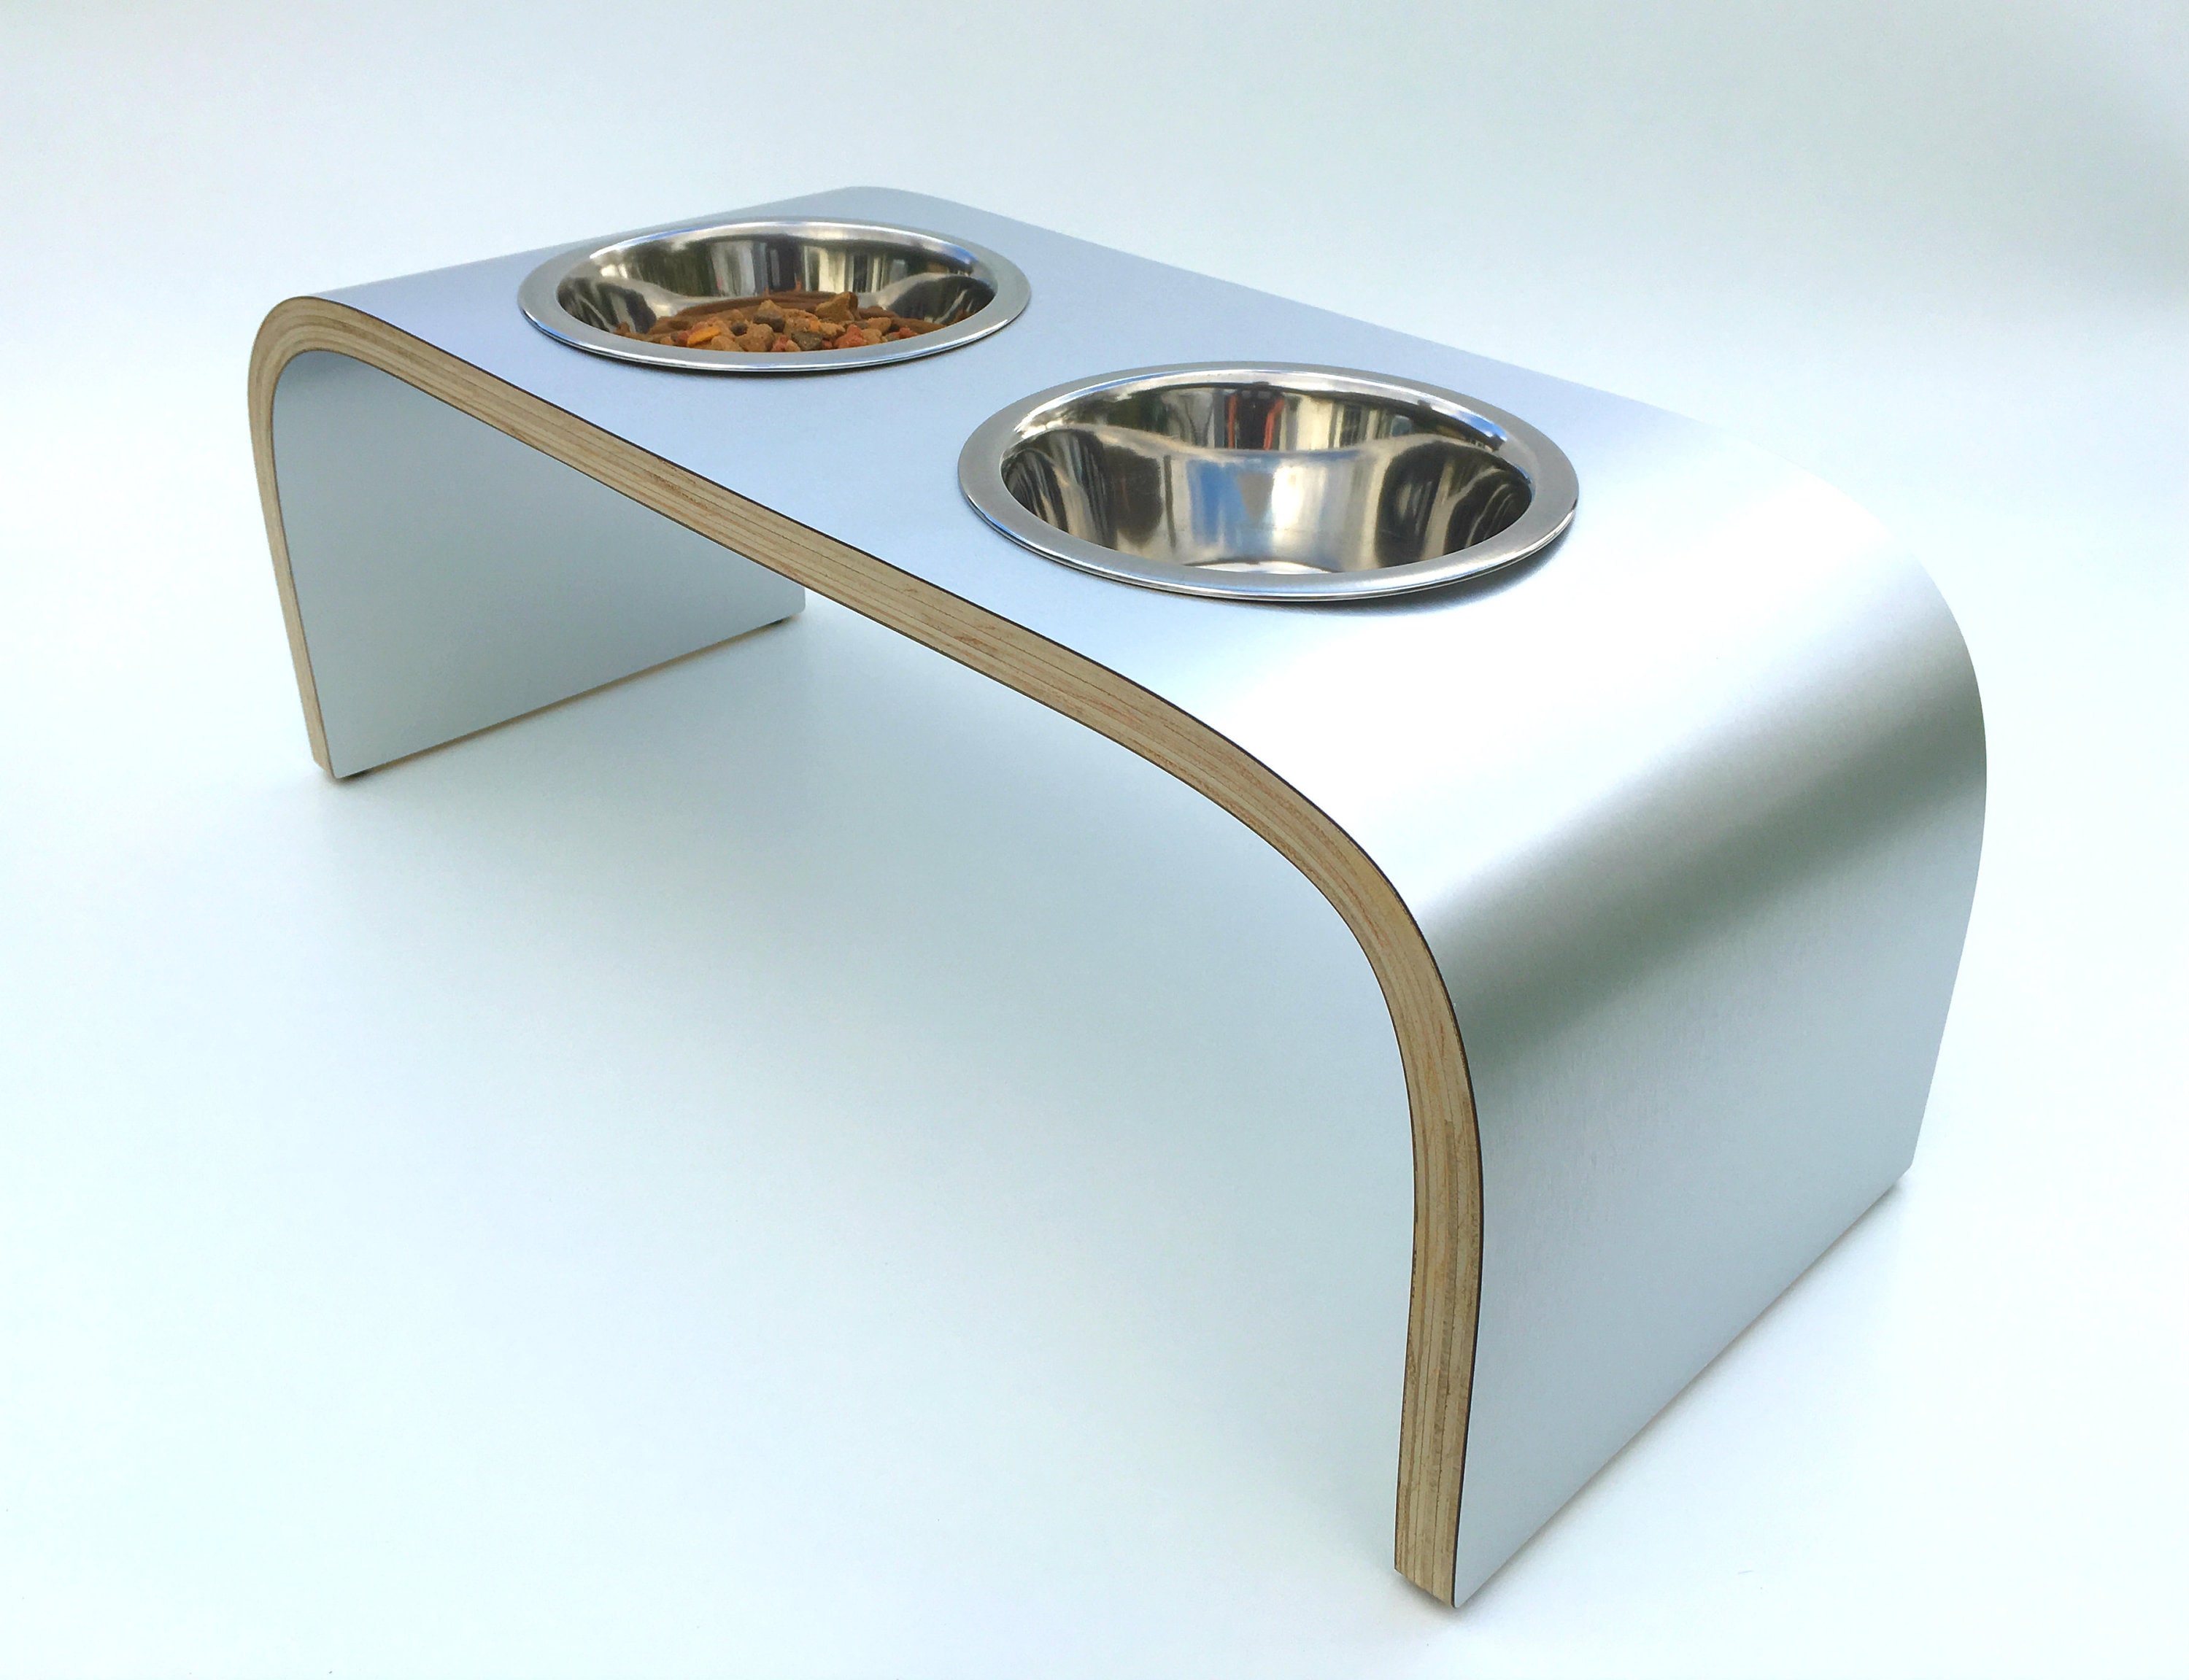 Modern Elevated Dog Bowl Stand, Small - Large Dog Feeding Station. Best Raised  Dog Food Bowls, Water Bowls Stainless Steel, Metal Stand